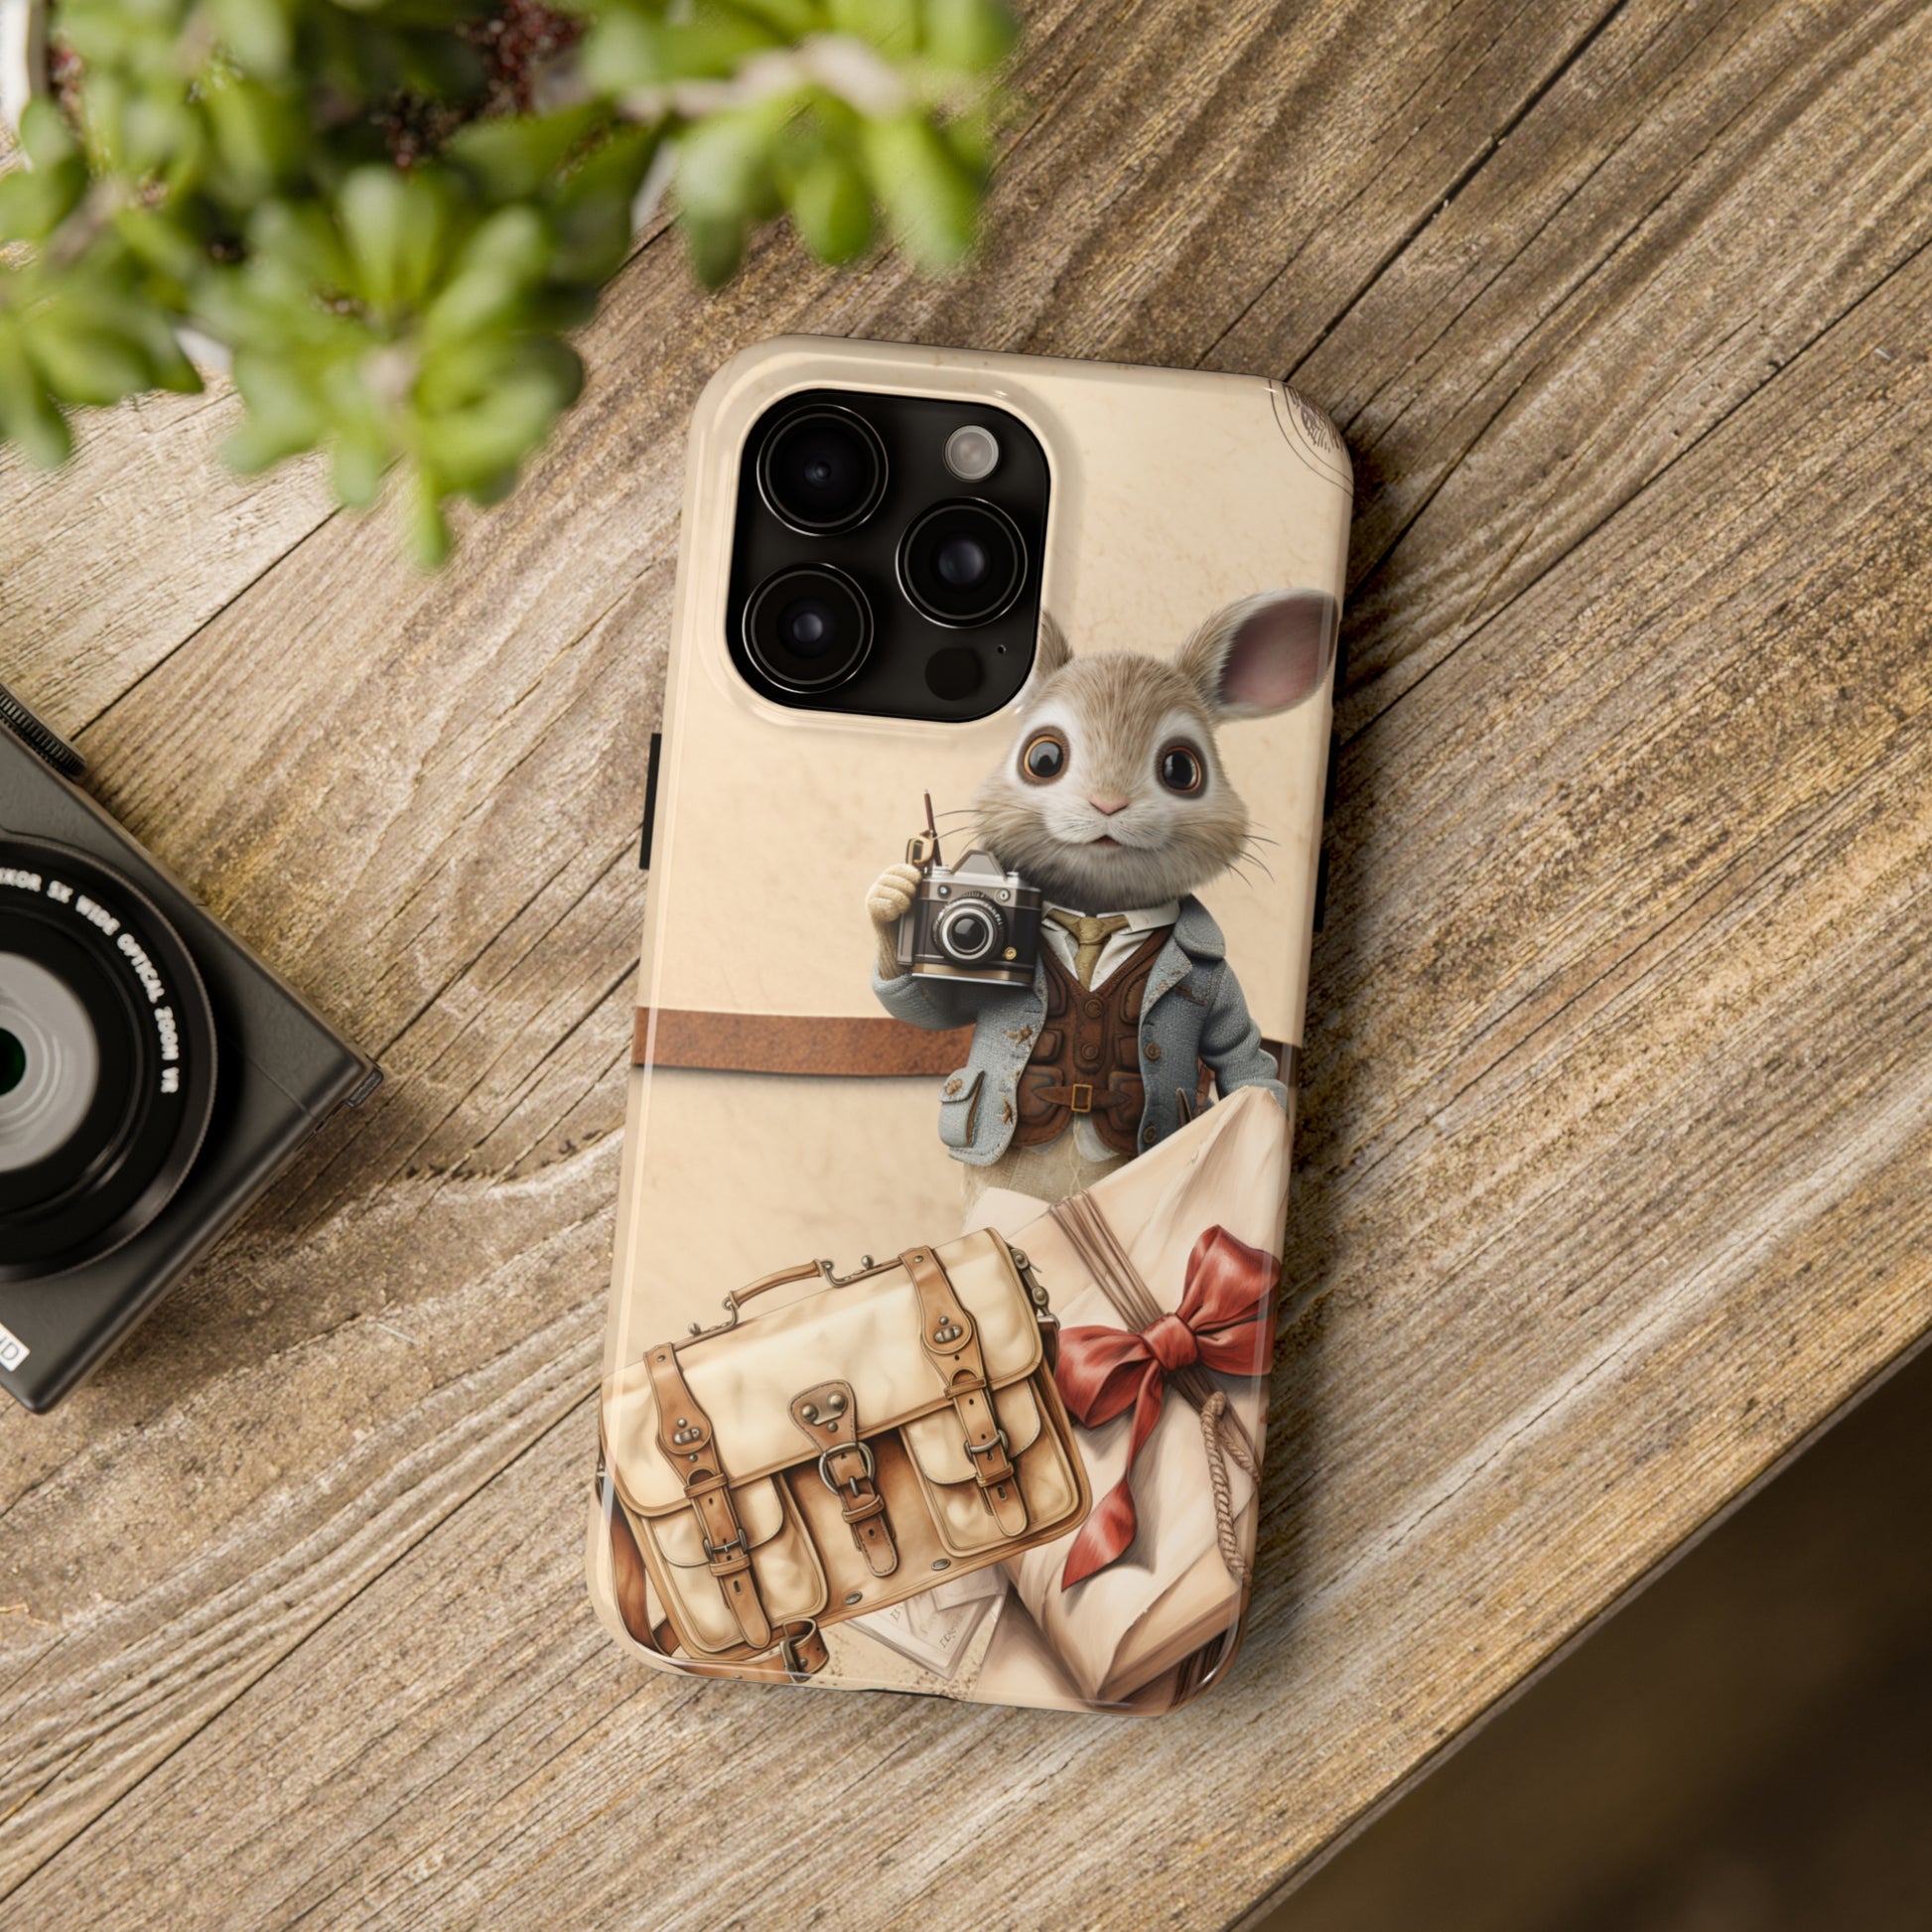 For the Family Album: iPhone Tough Case Design - Wireless Charging - Superior Protection - Original Graphics by TheGlassyLass